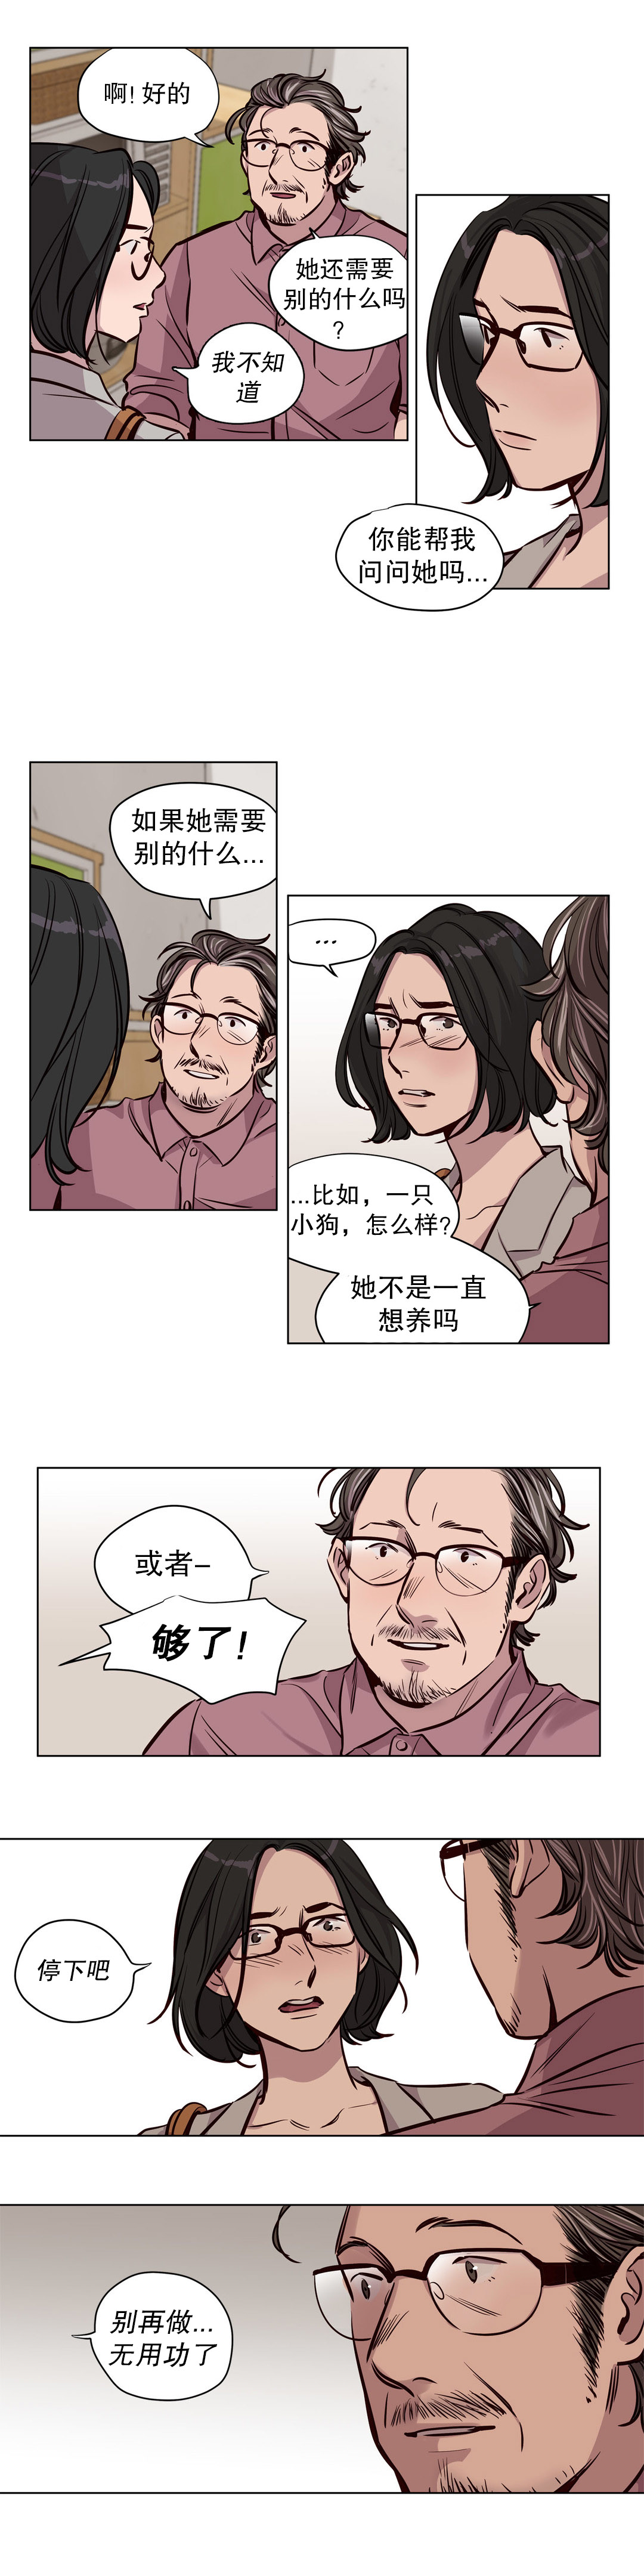 [Ramjak] 赎罪营(Atonement Camp) Ch.50-51 (Chinese) page 7 full